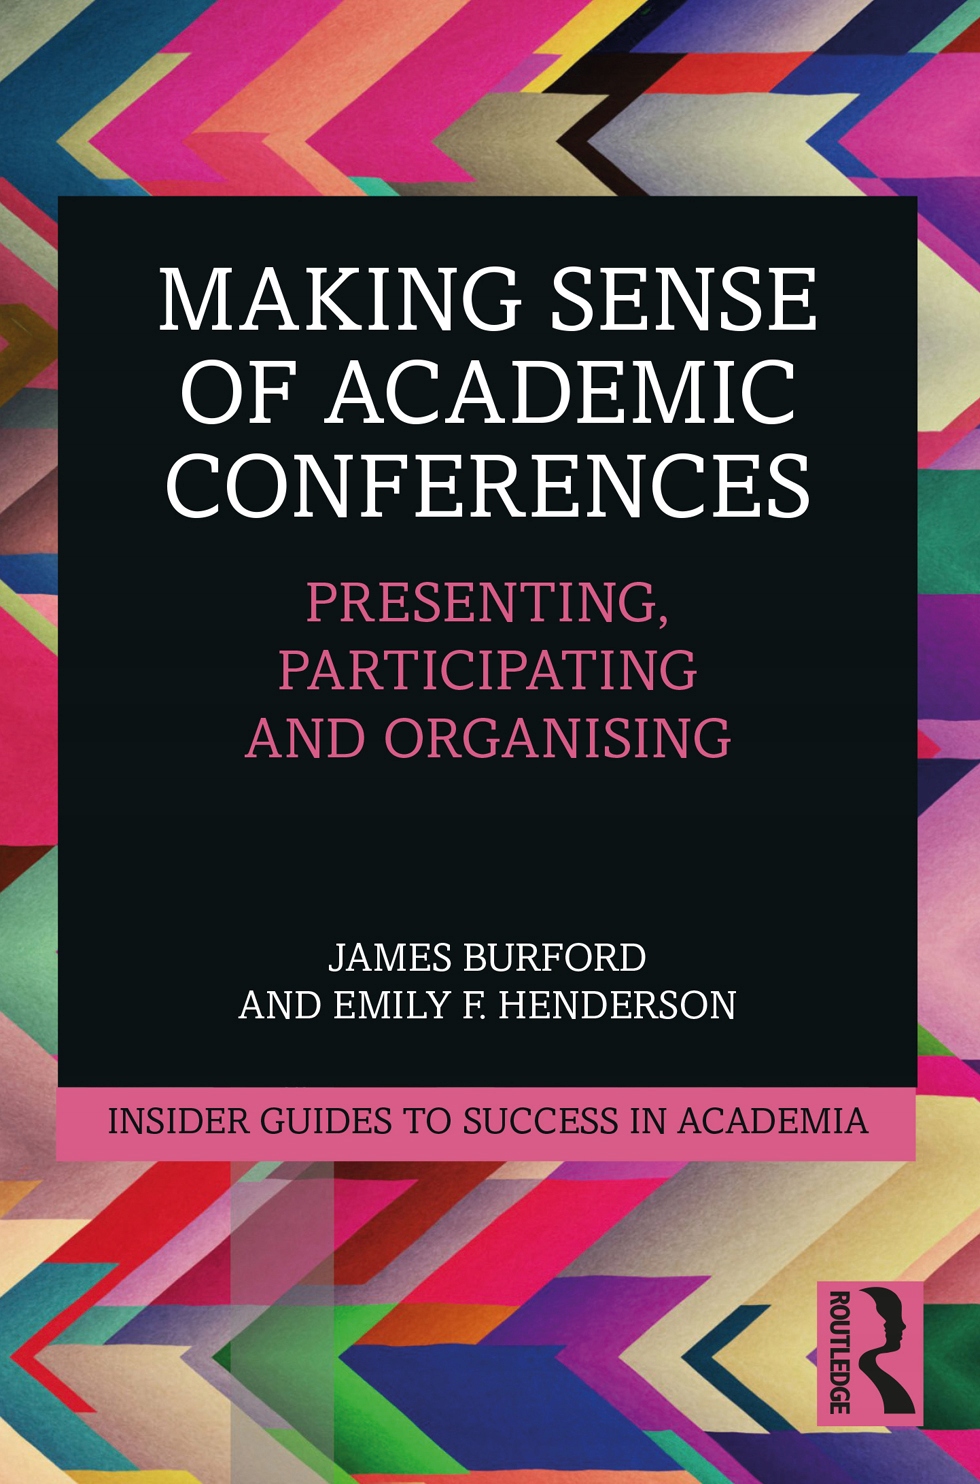 Cover page of Making Sense of Academic Conferences, Routledge 2022